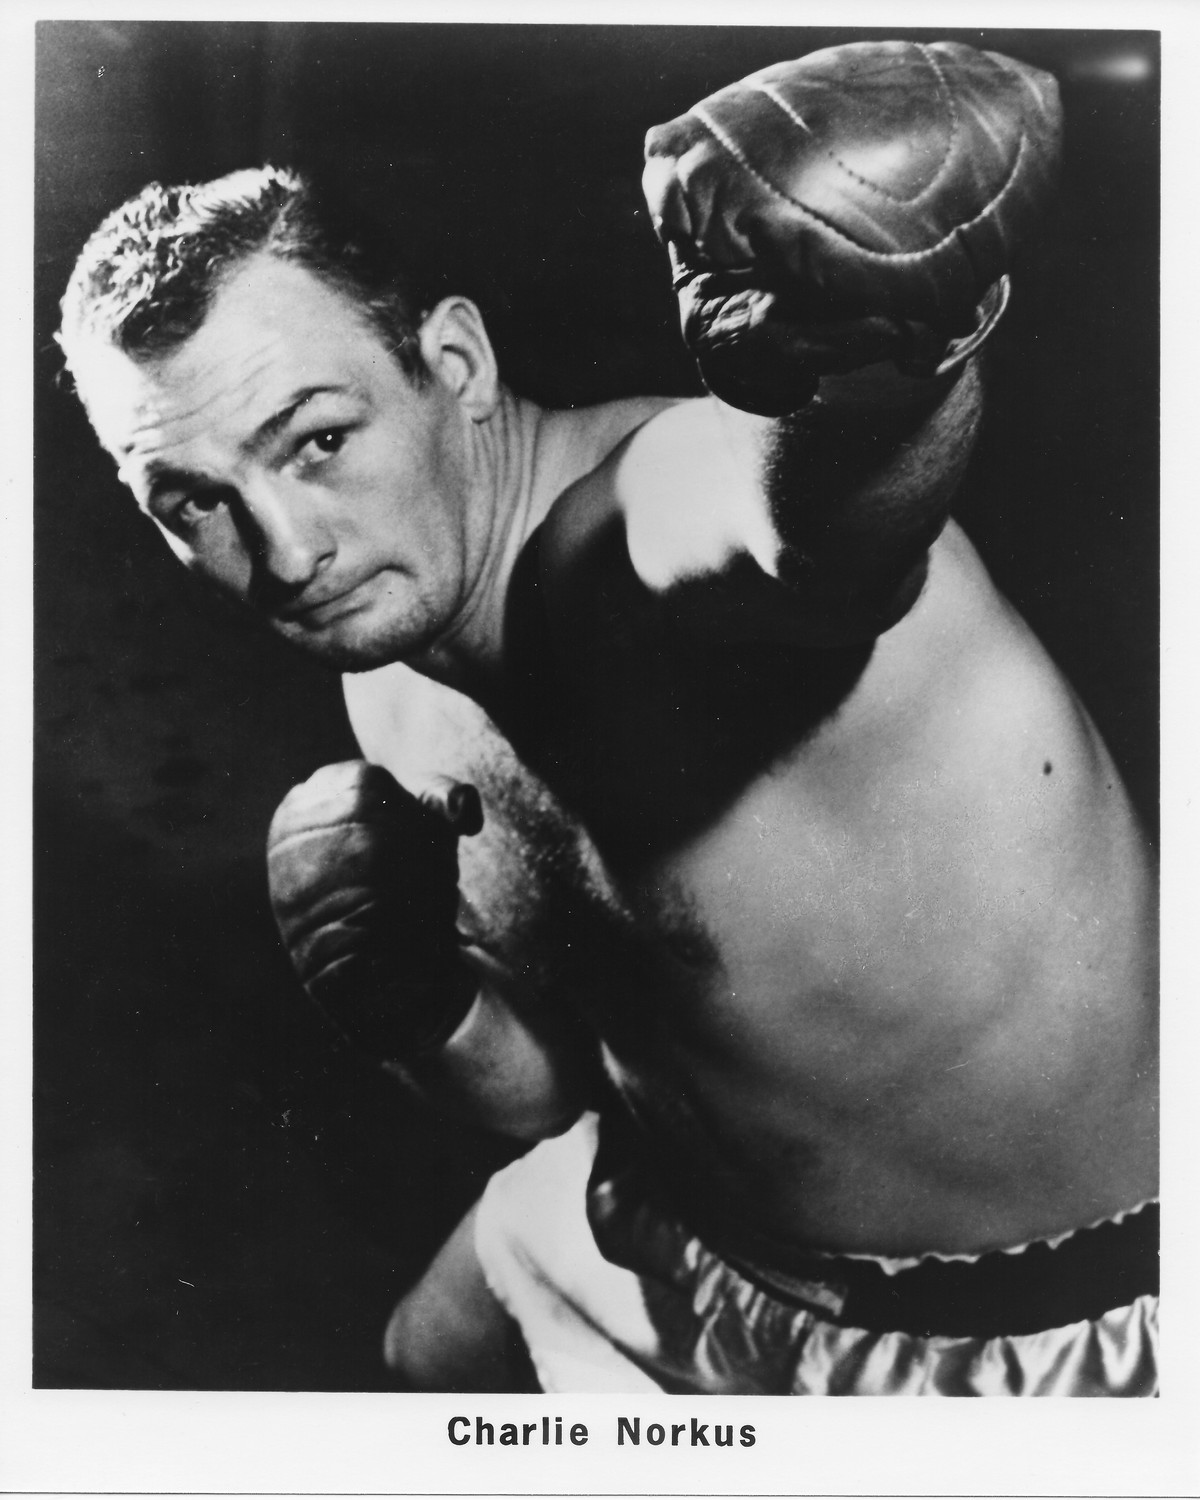 The late Charley Norkus, a heavyweight boxing contender in the 1950s and a former Wantagh resident, was posthumously inducted into the New York State Boxing Hall of Fame on April 29.